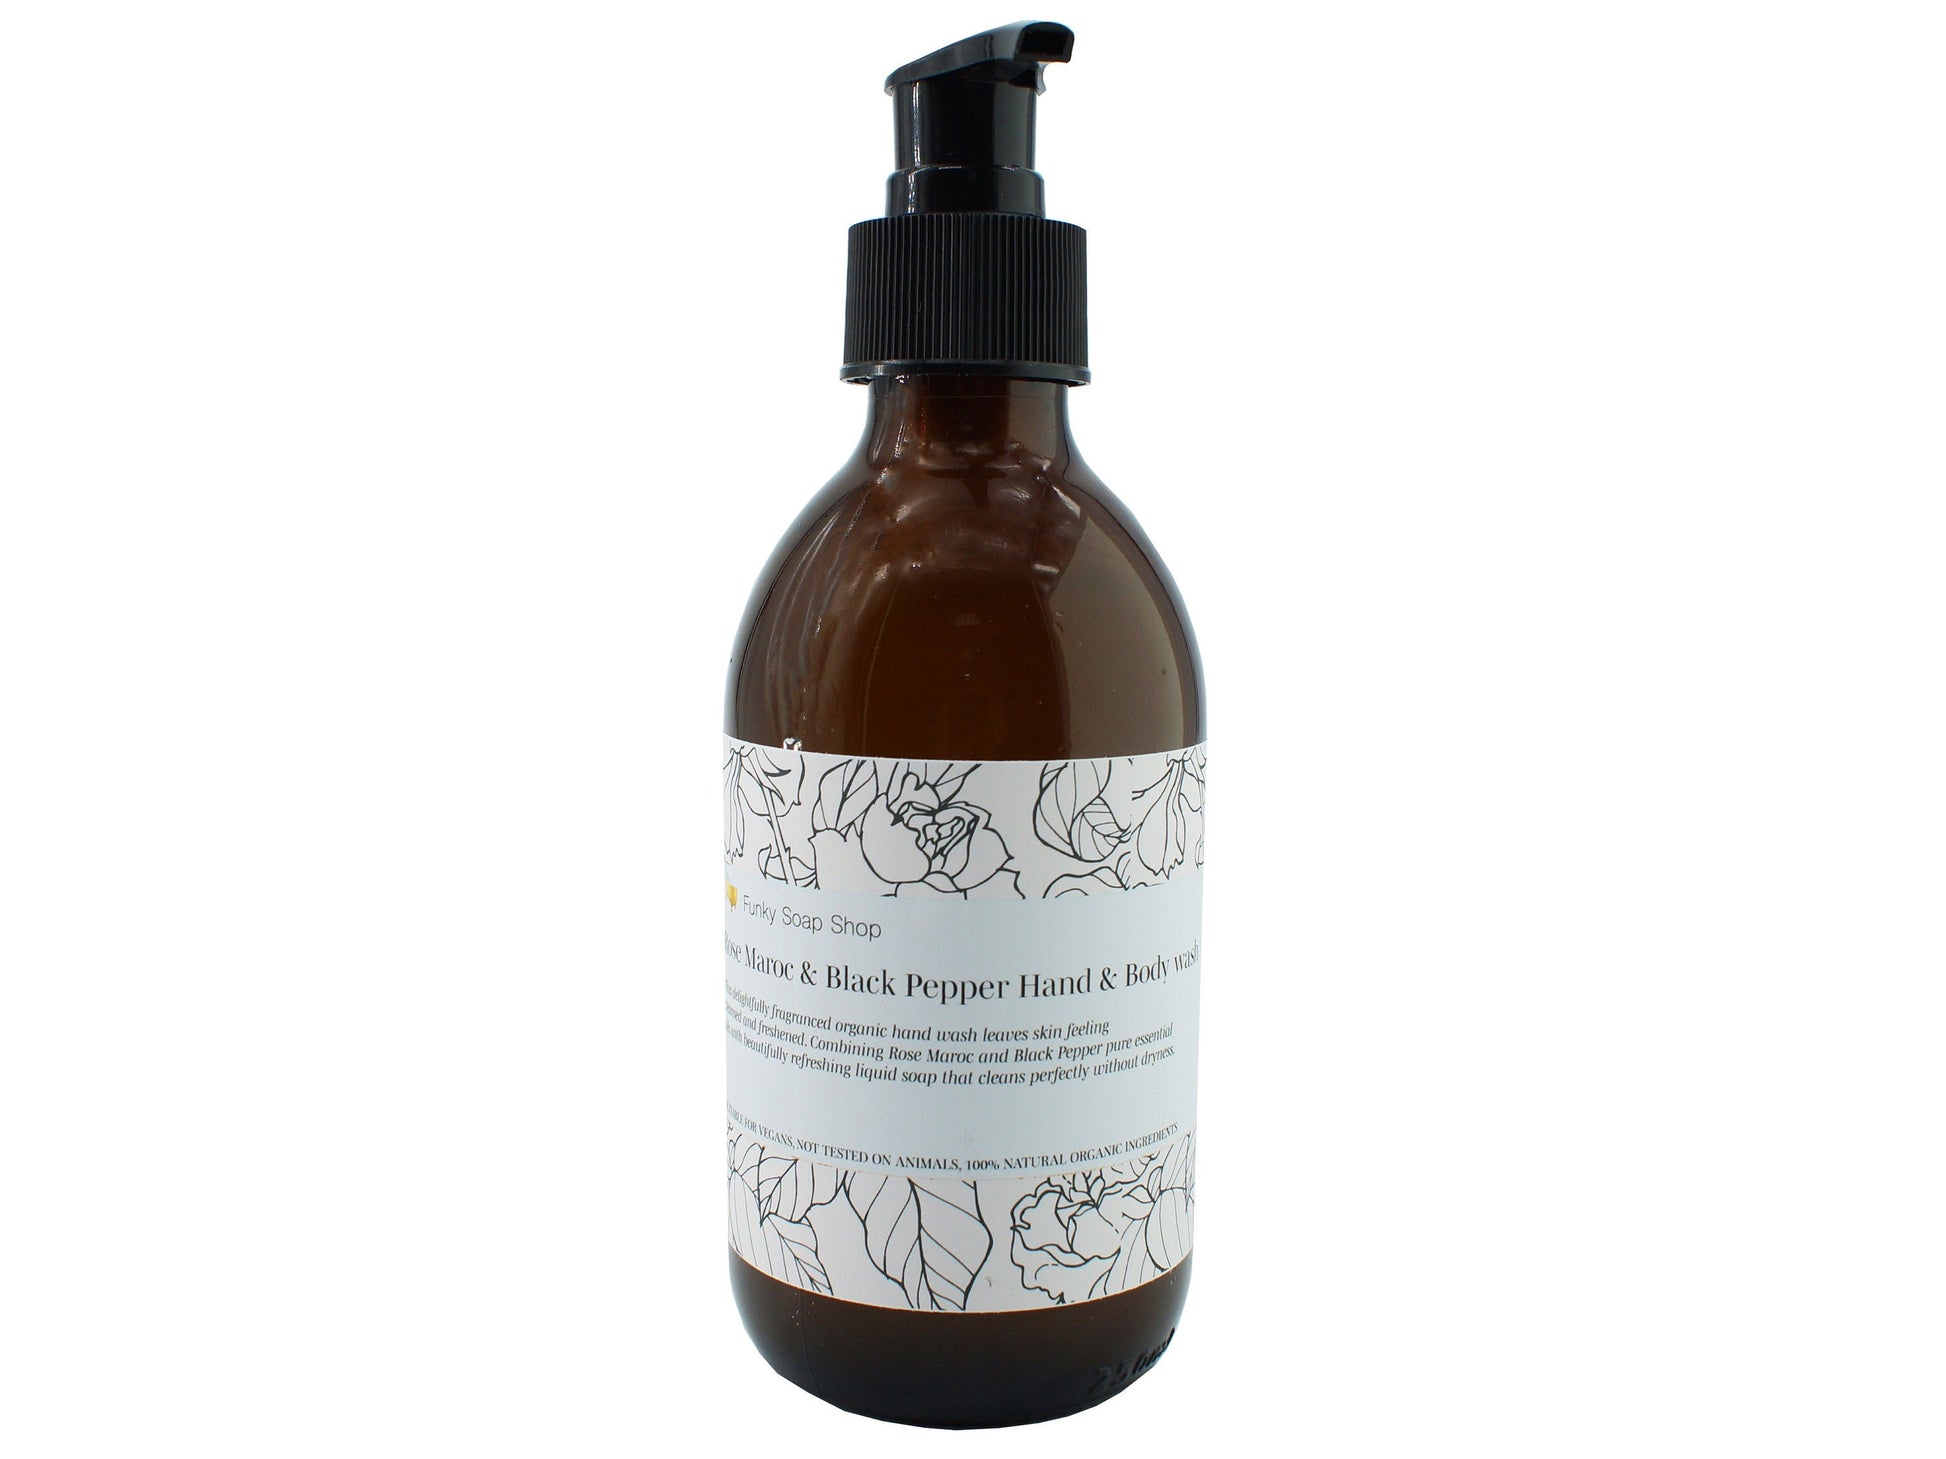 Rose Maroc & Black Pepper Hand and Body wash, Glass Bottle of 250ml - Funky Soap Shop